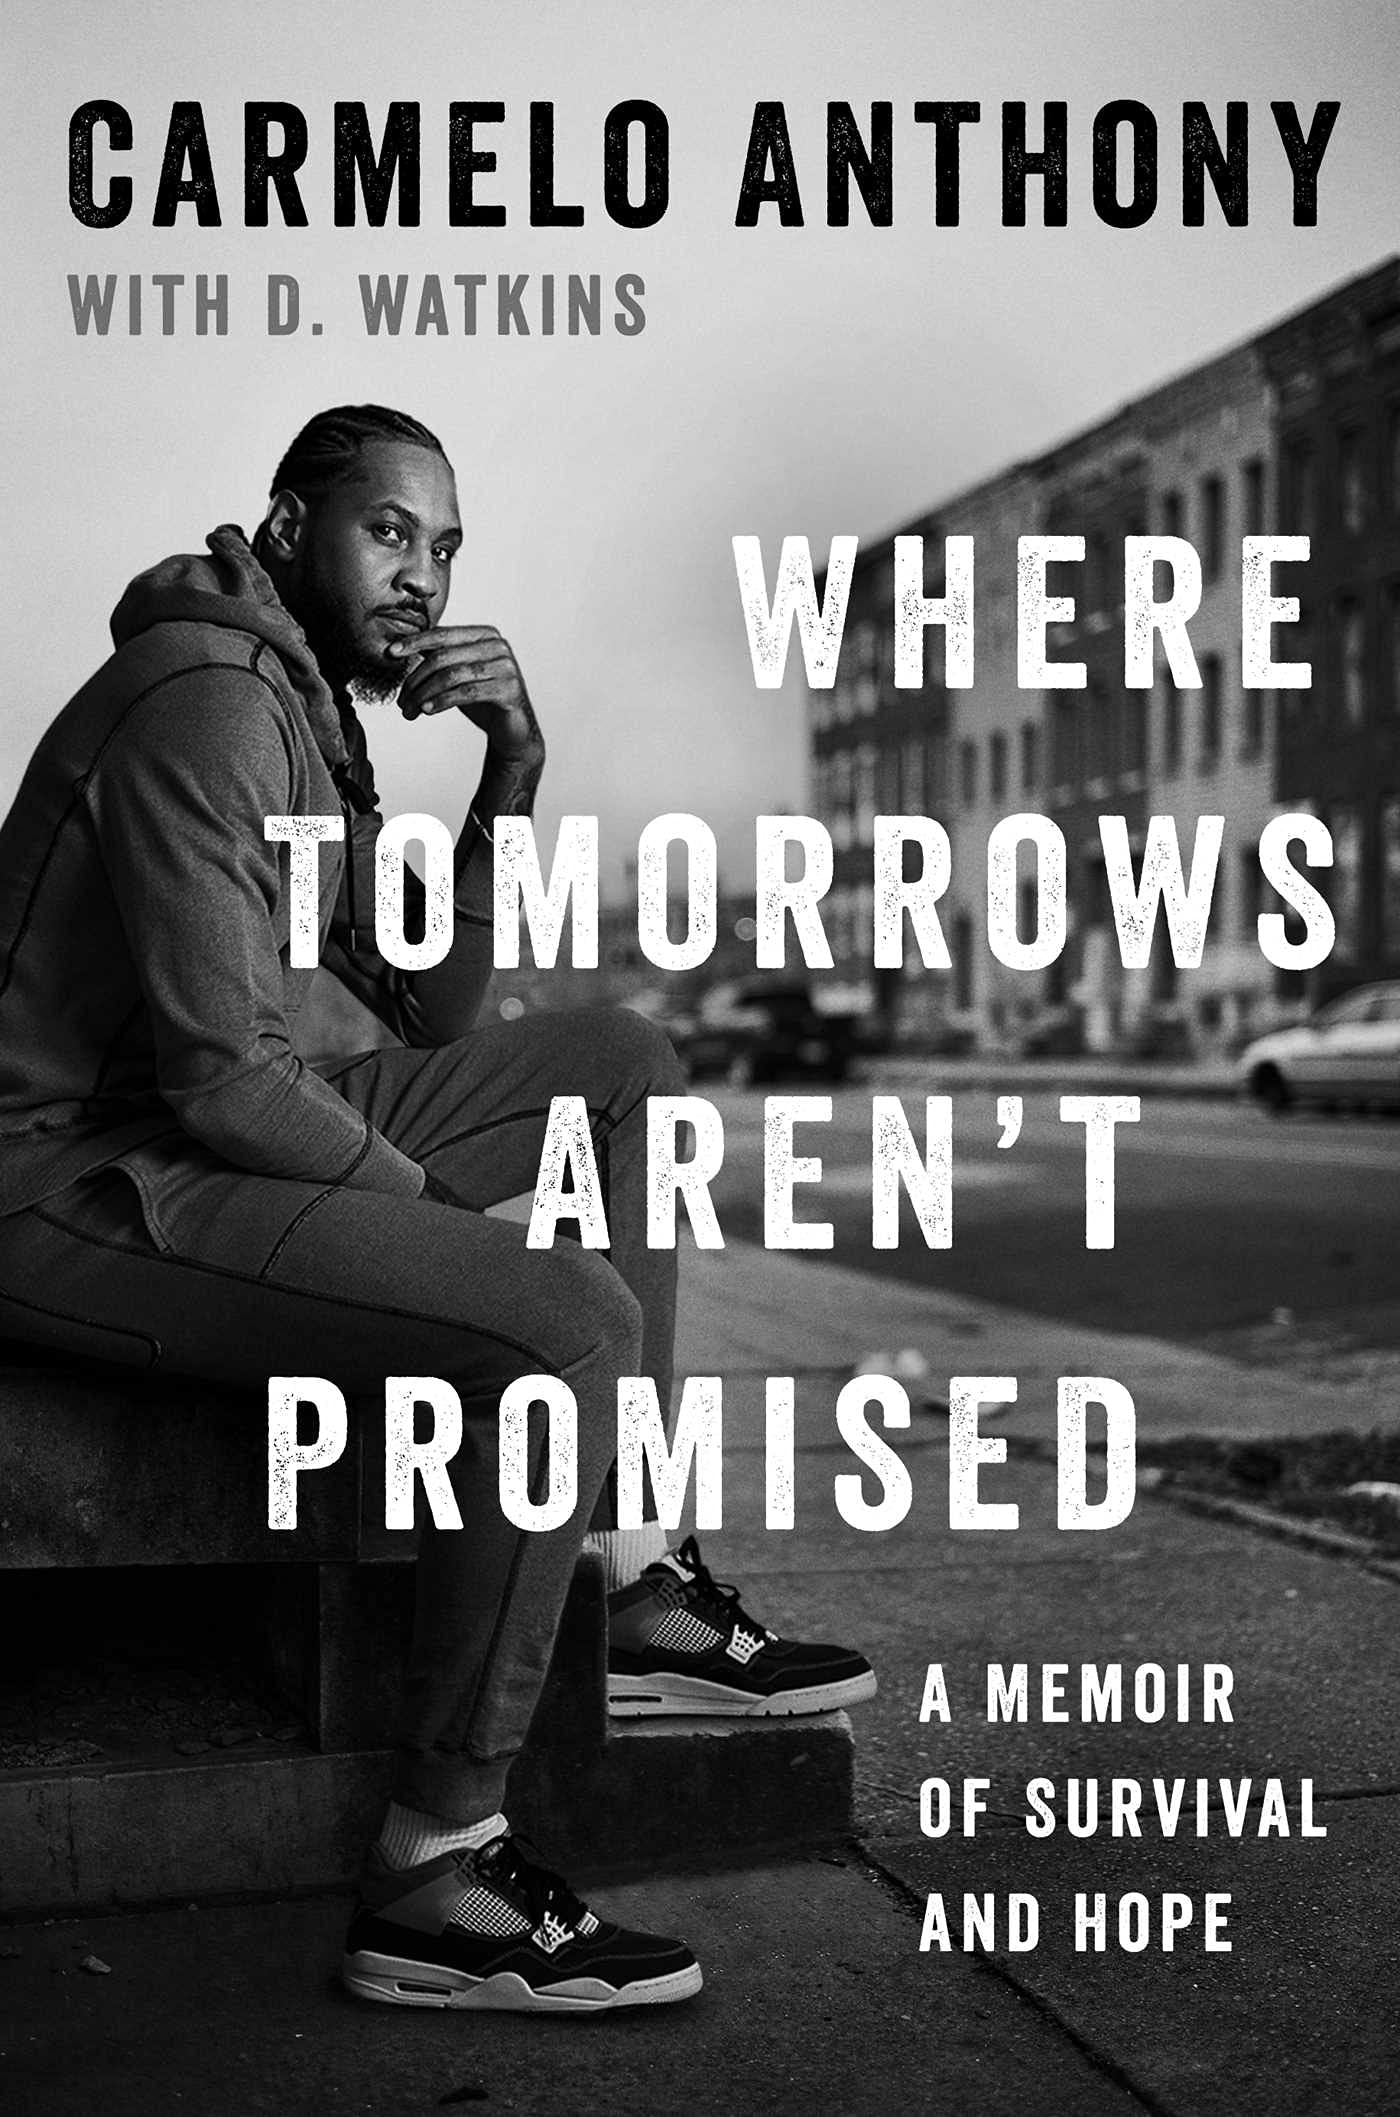 Image for "Where Tomorrows Aren't Promised"